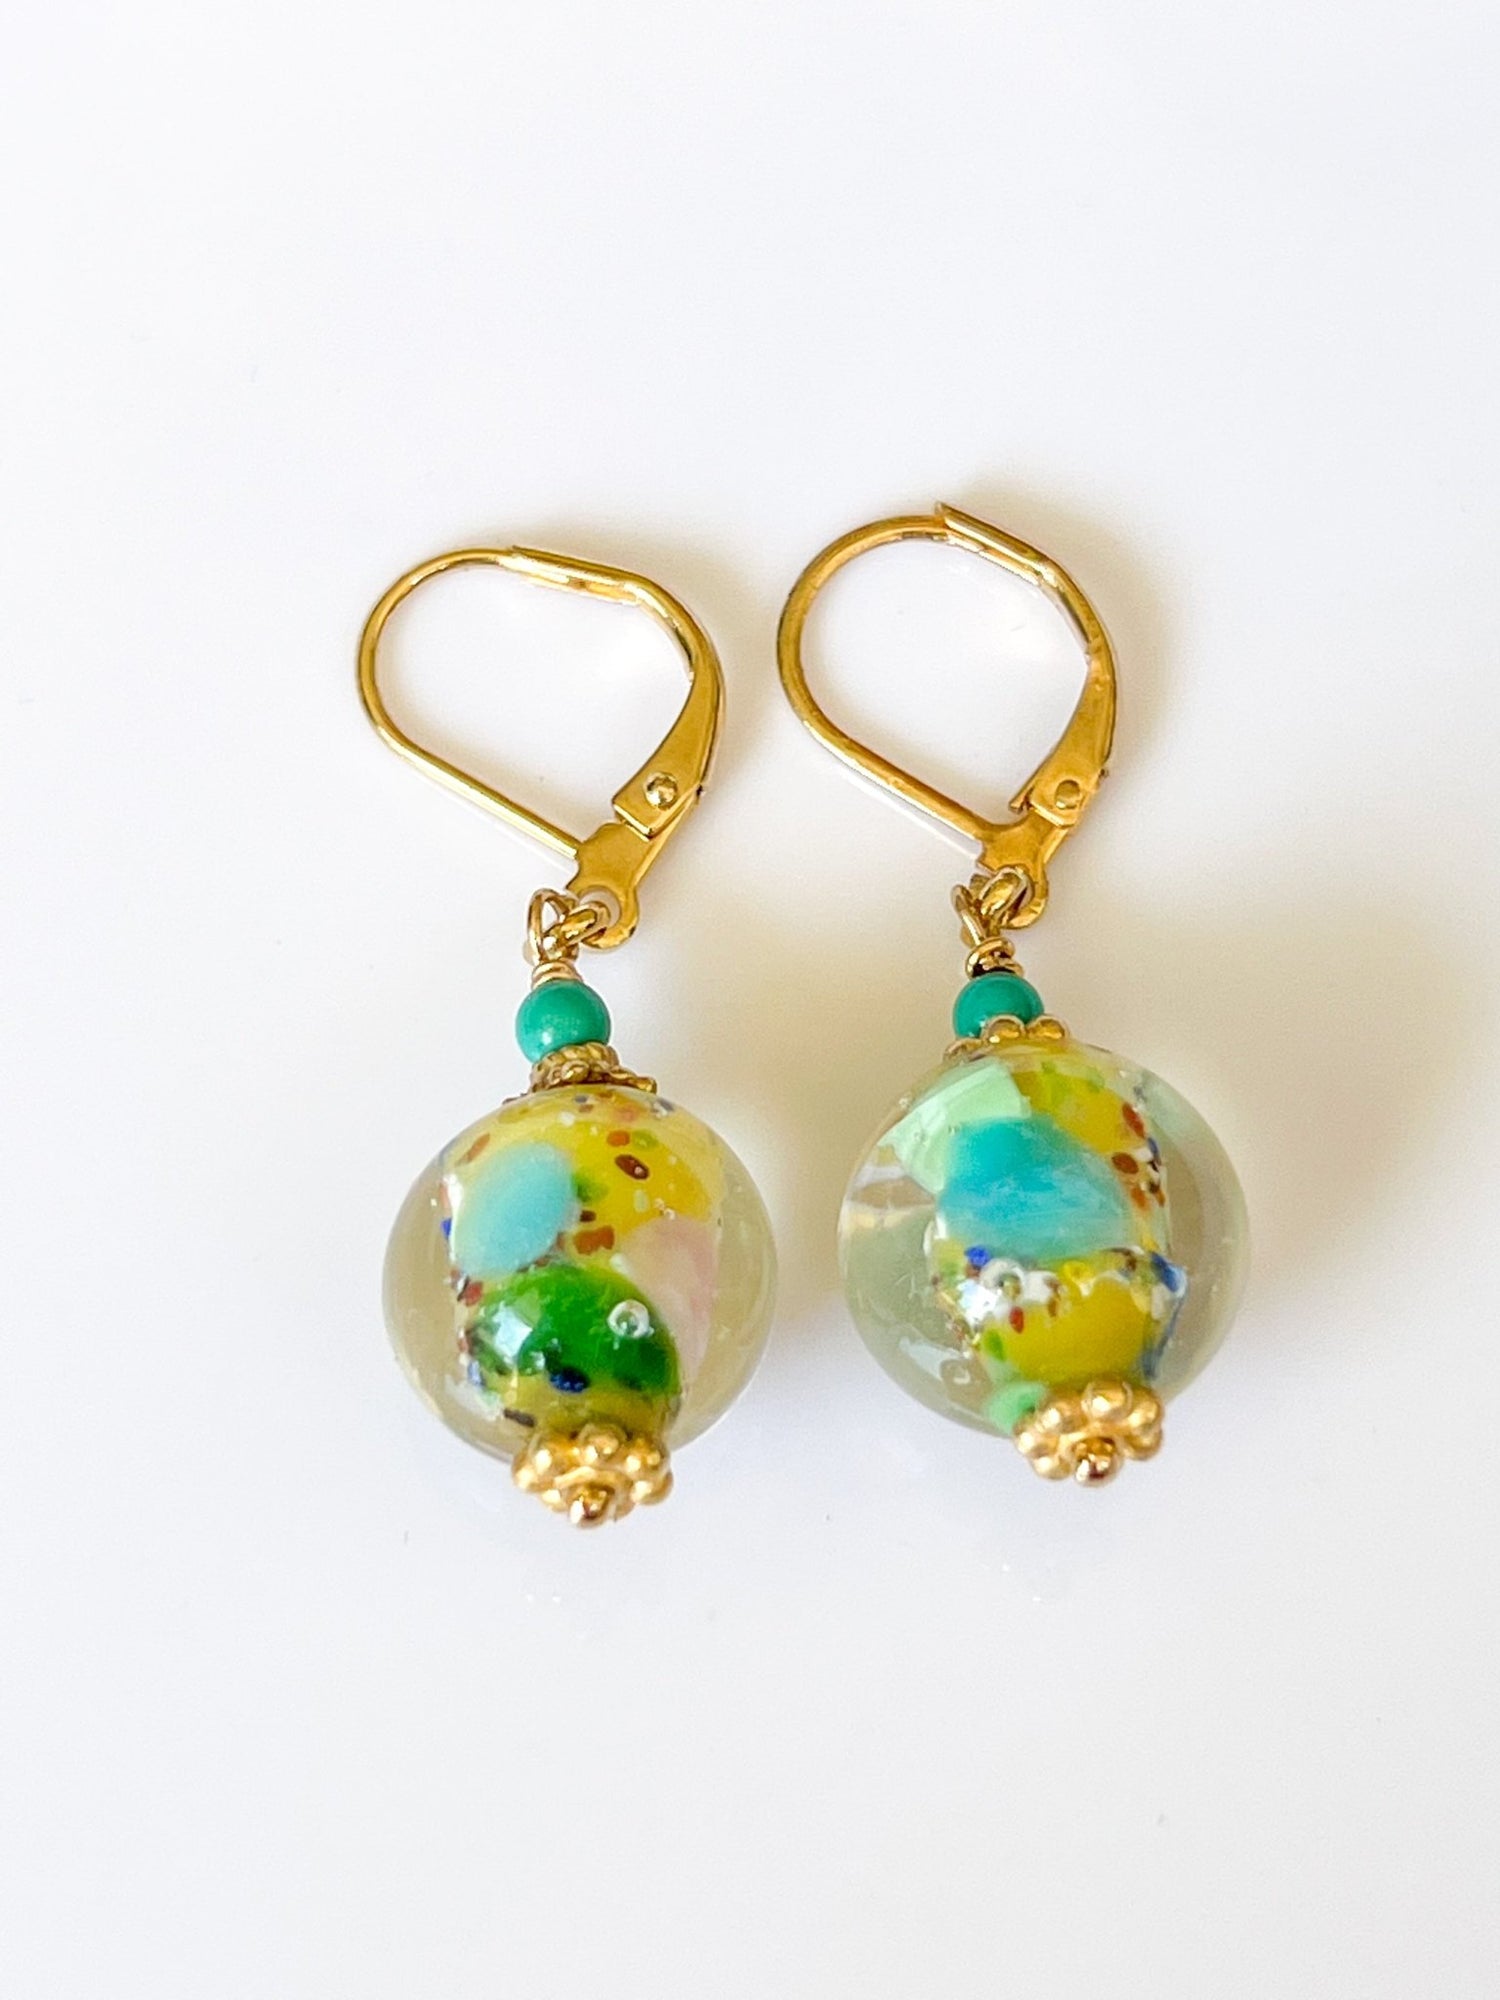 Confetti Peking Glass Floral Gold Charm Earrings with Green Turquoise by Sage Machado - The Sage Lifestyle